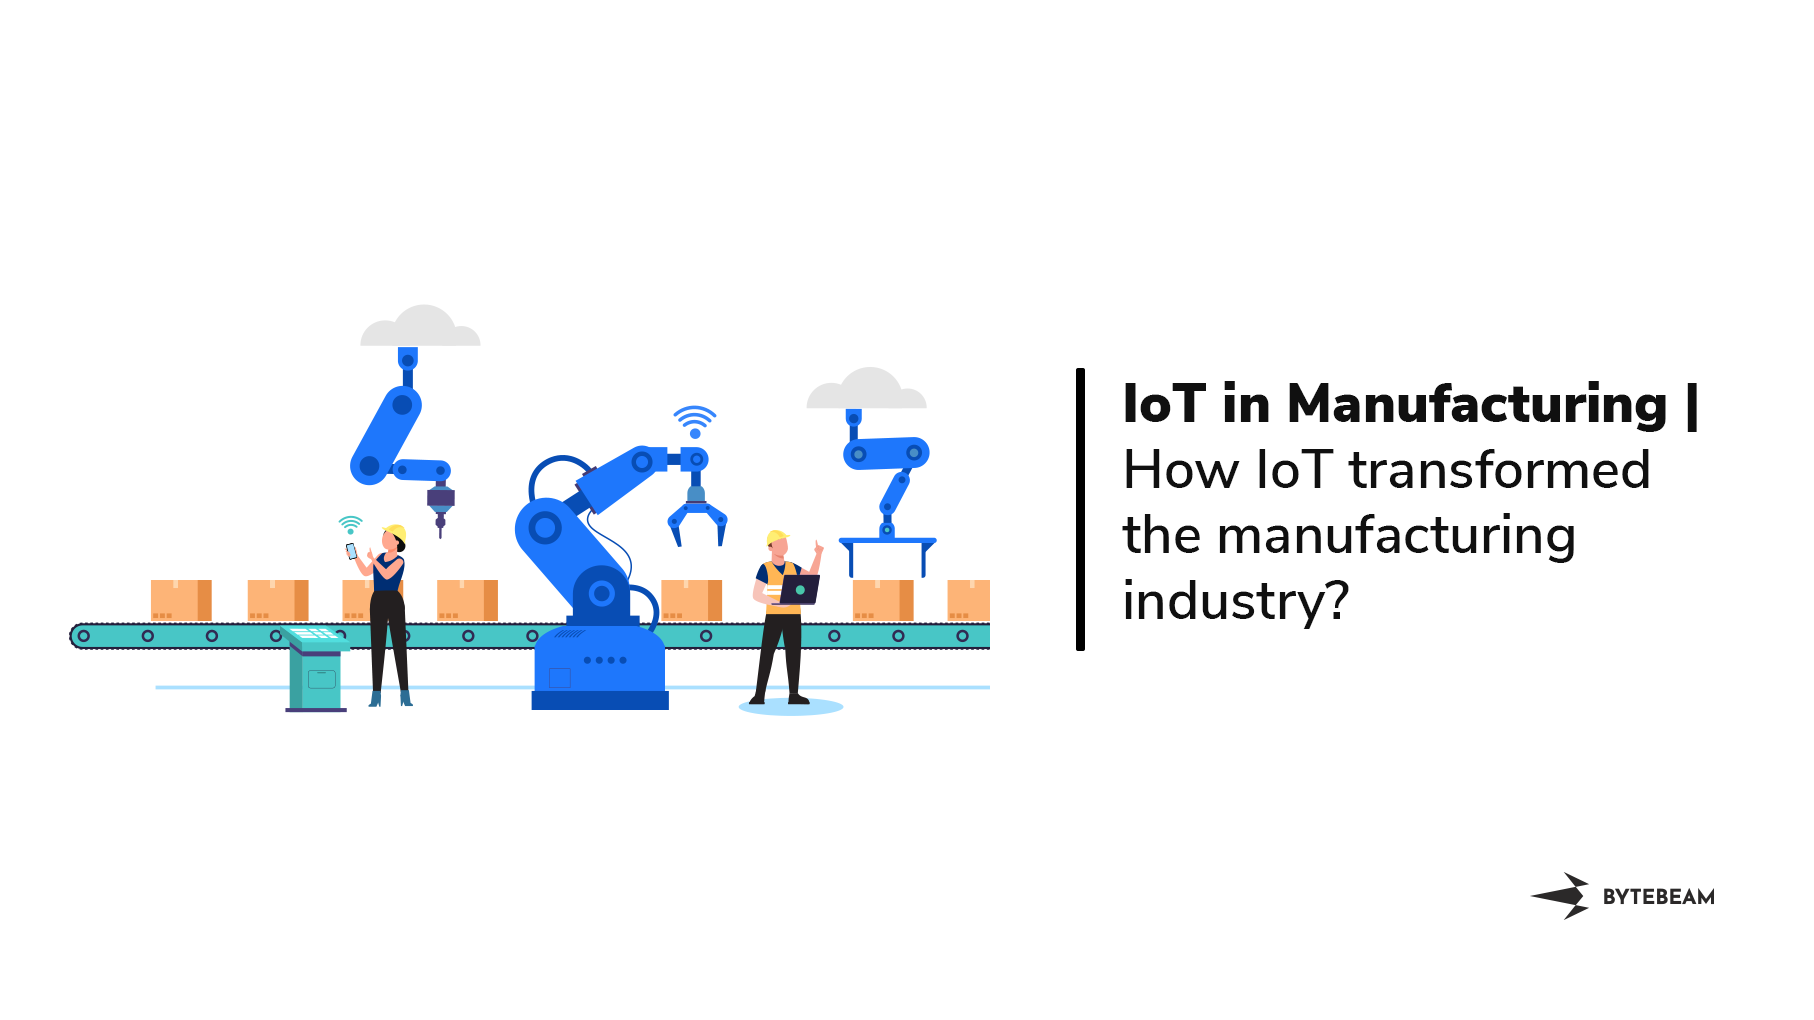 IoT in Manufacturing